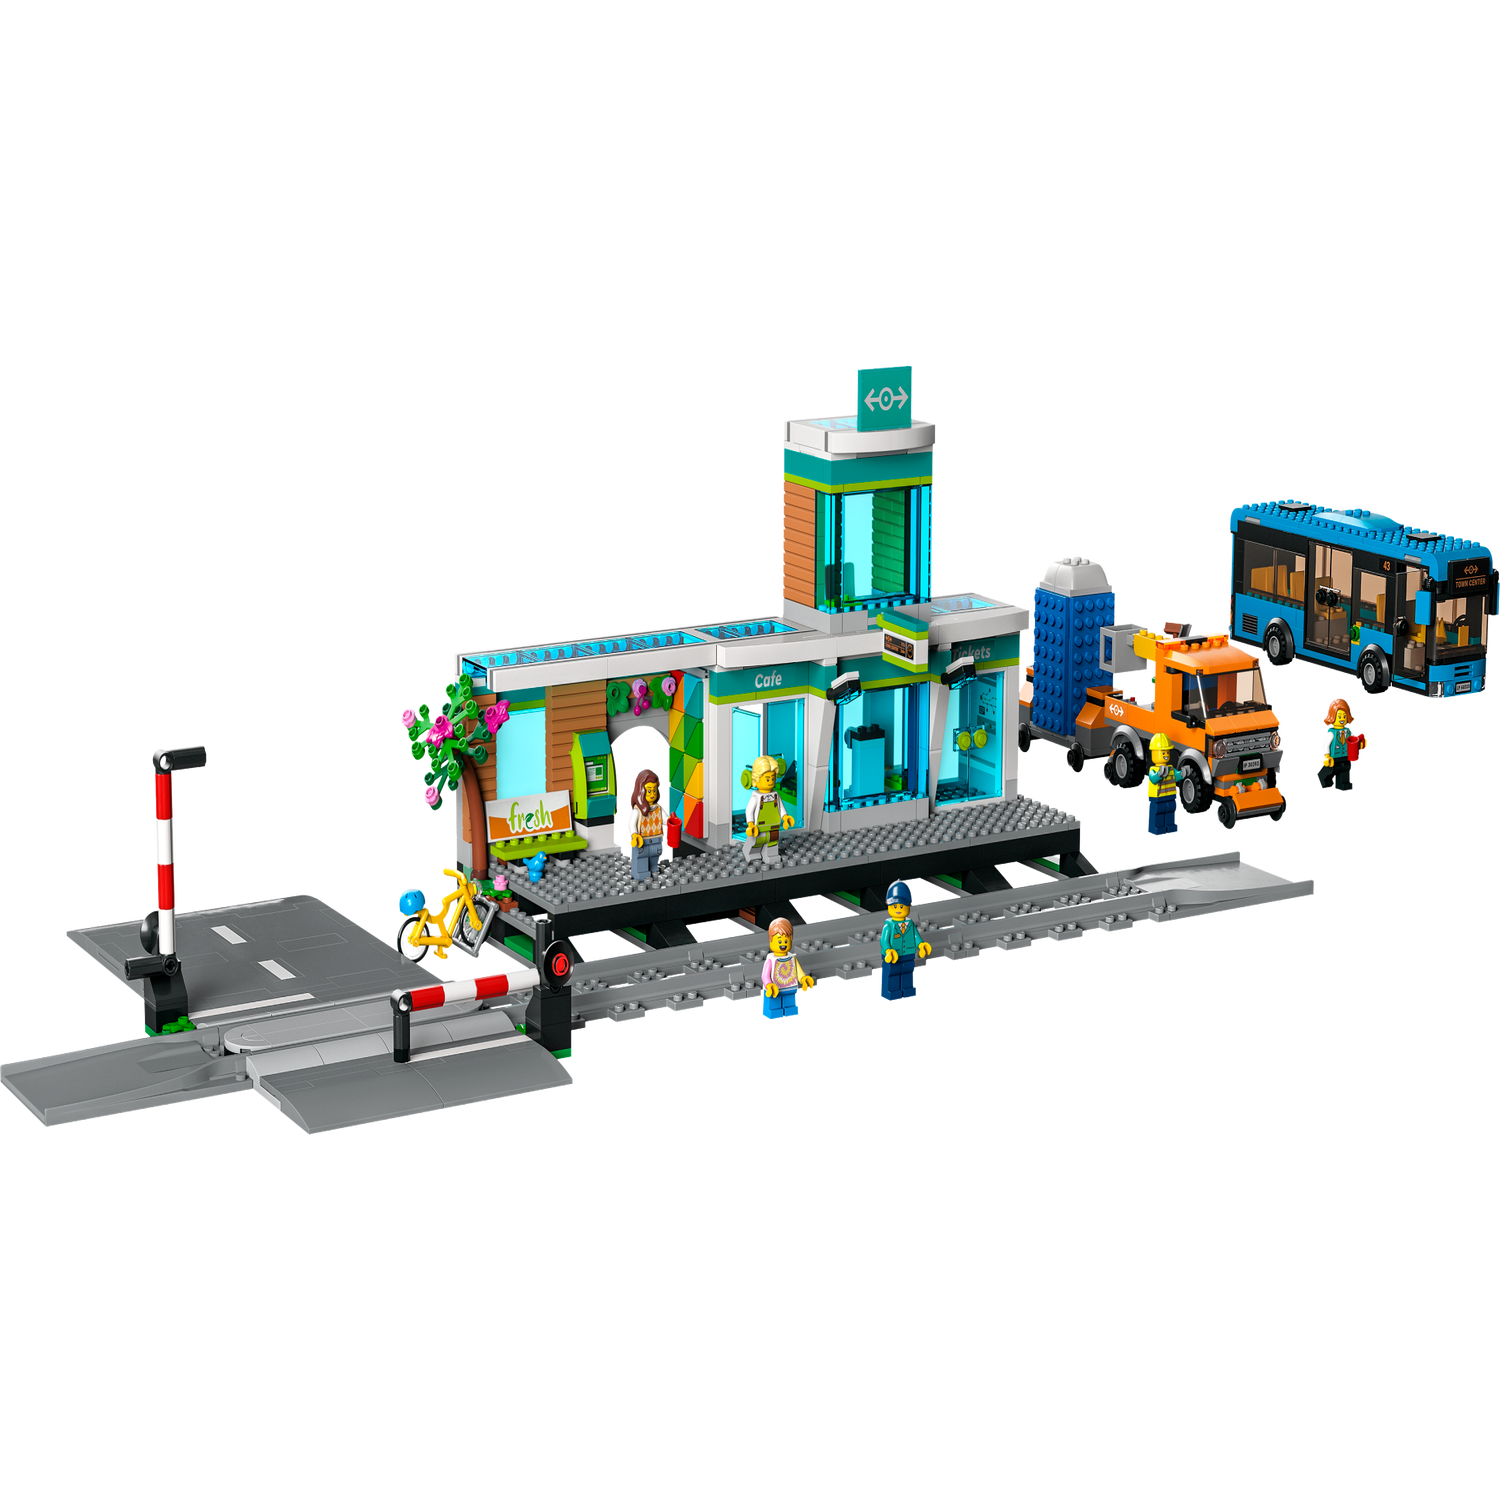 LEGO City Train Station Set 60335 with Bus, Rail Truck, and Tracks